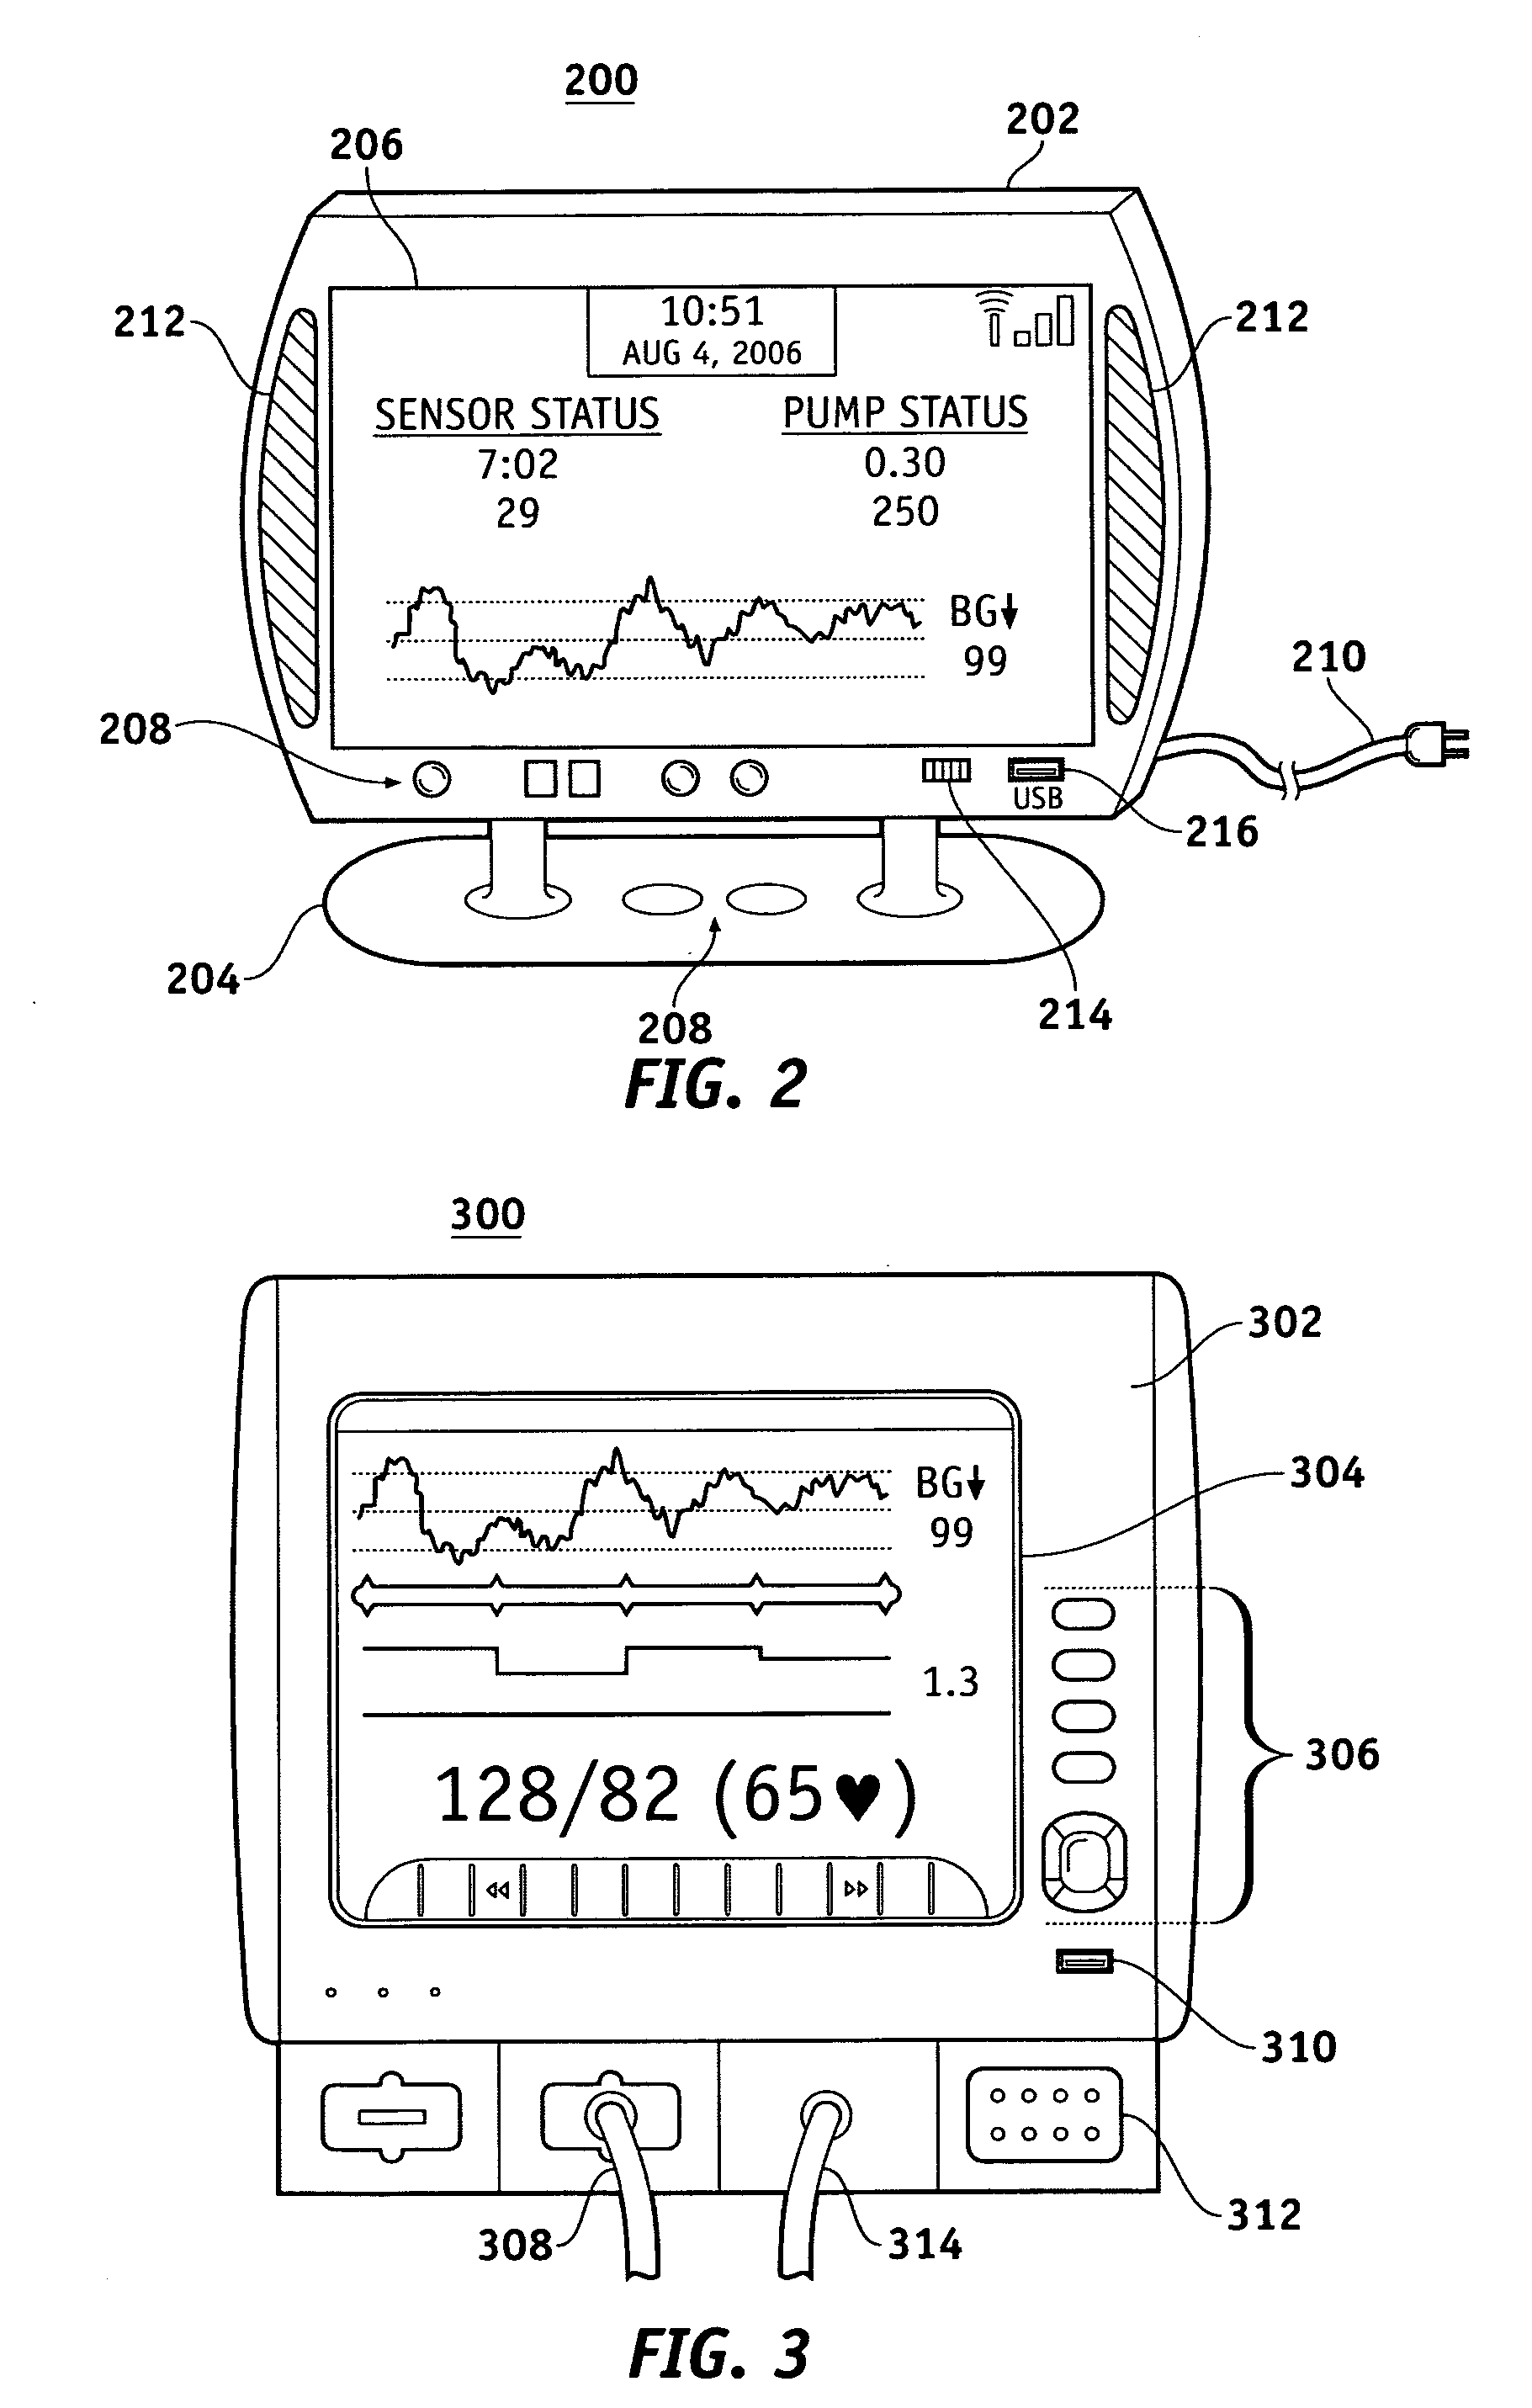 Router device for centralized management of medical device data